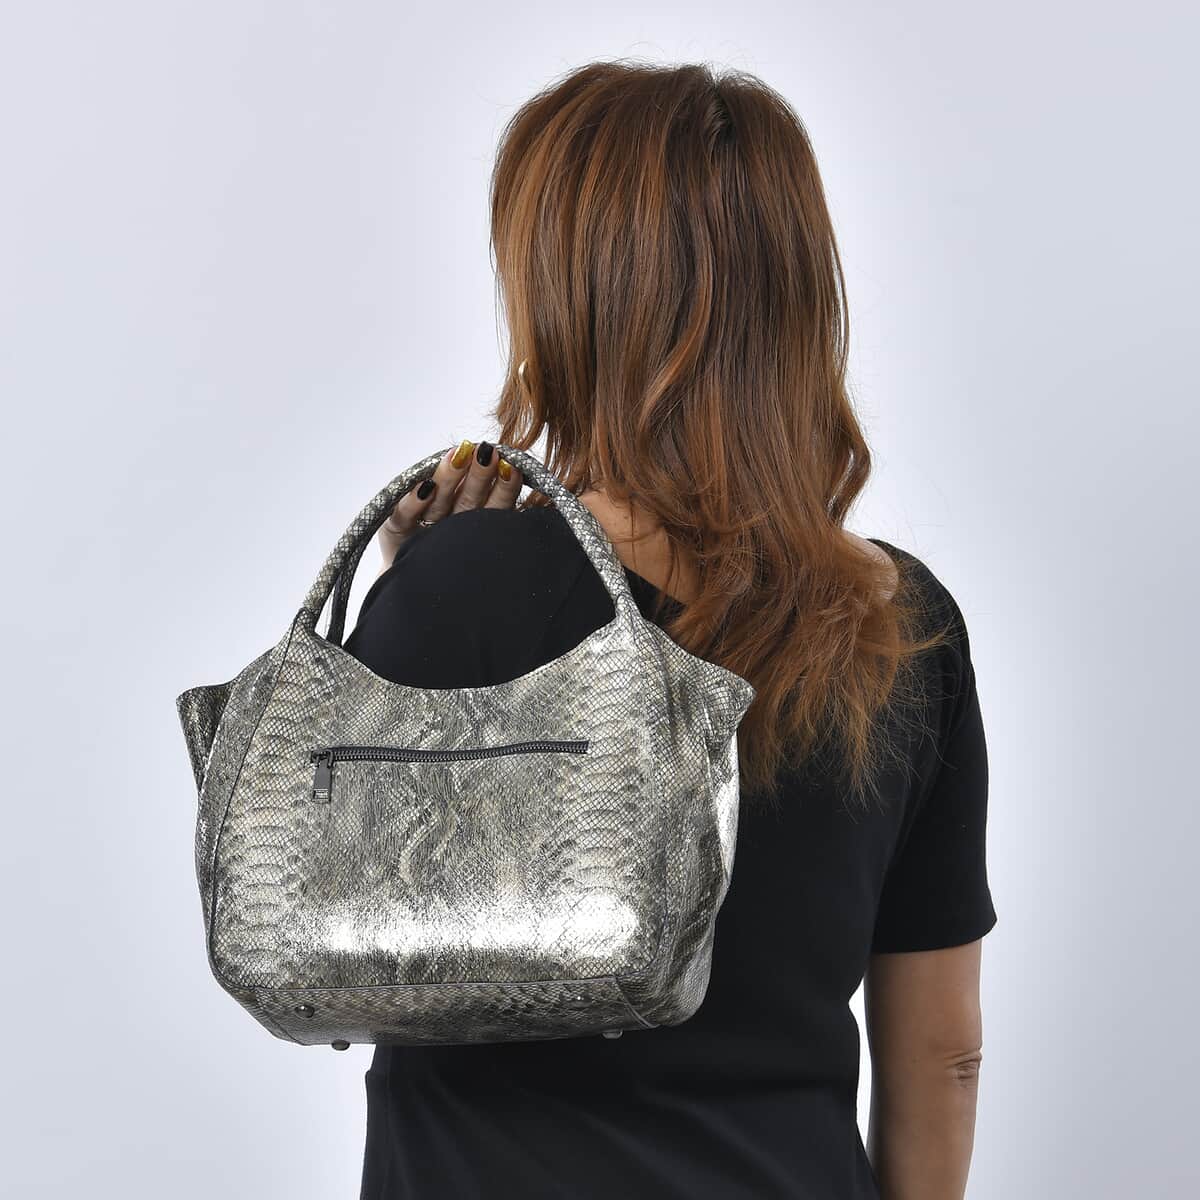 Gold and Black Snake Print Genuine Leather Hobo Bag (11"x6"x9") with 47" Detachable Shoulder Strap and 7" Handle Drop image number 2